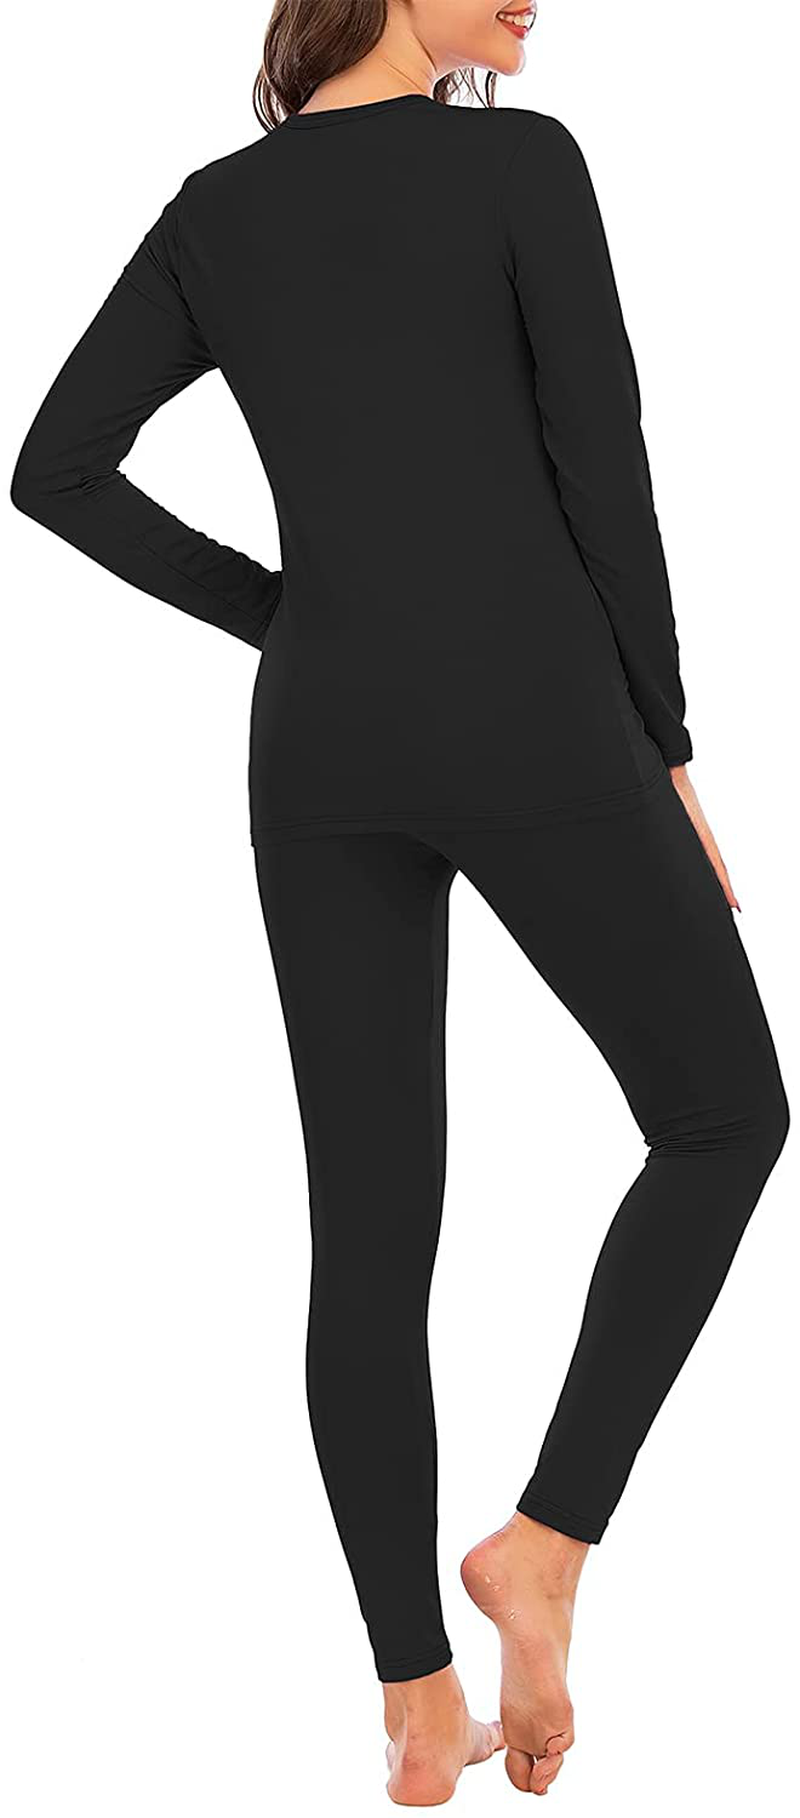 Century Star Thermal Underwear for Women Long Johns Set with Fleece Lined Base Layer Ultra Soft Women Thermal Set